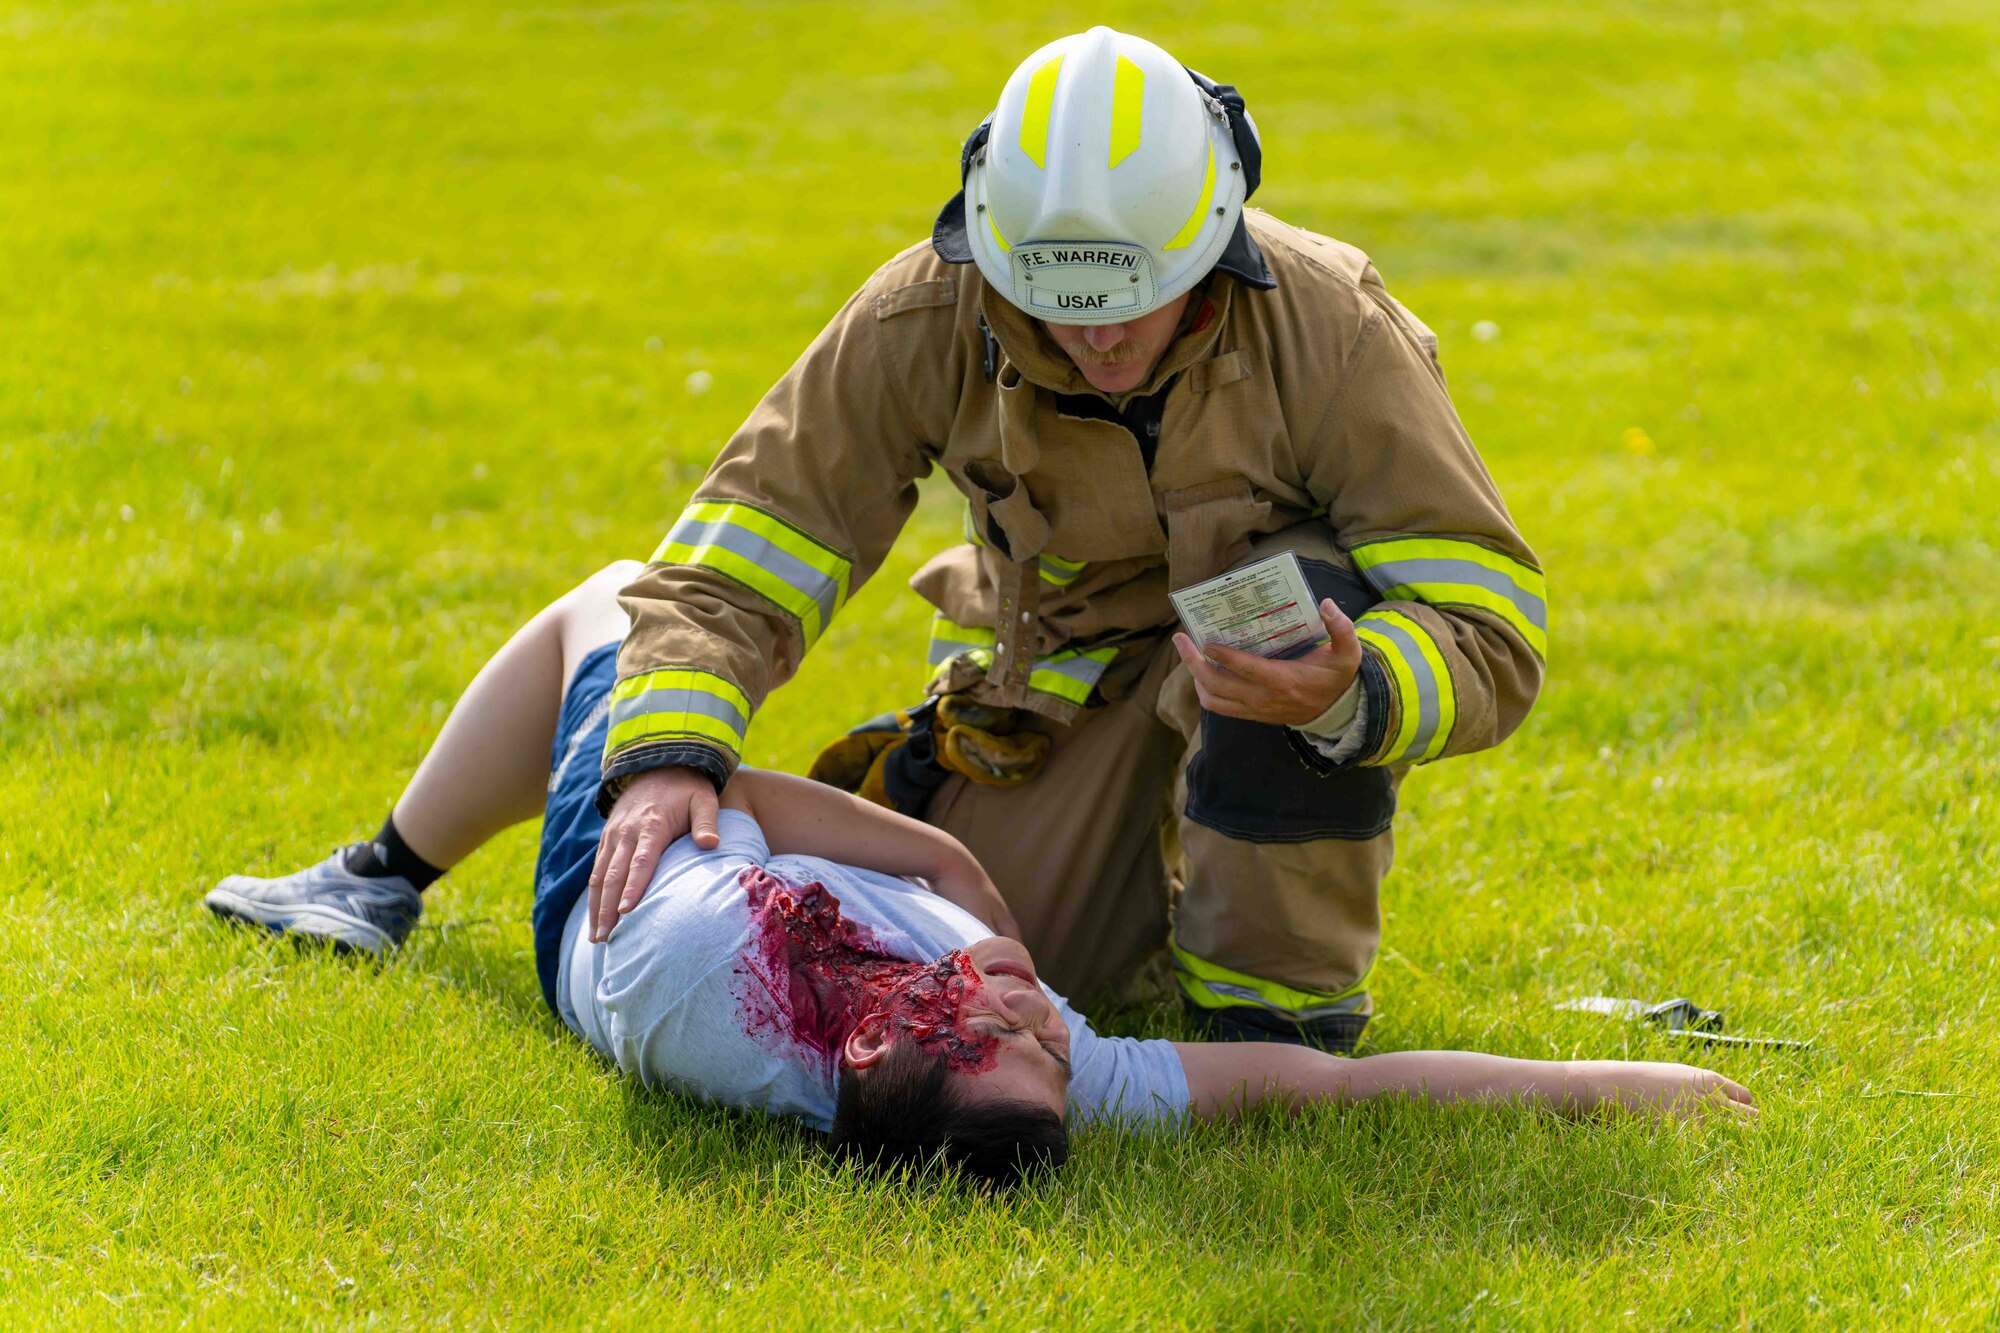 mass accident response exercise